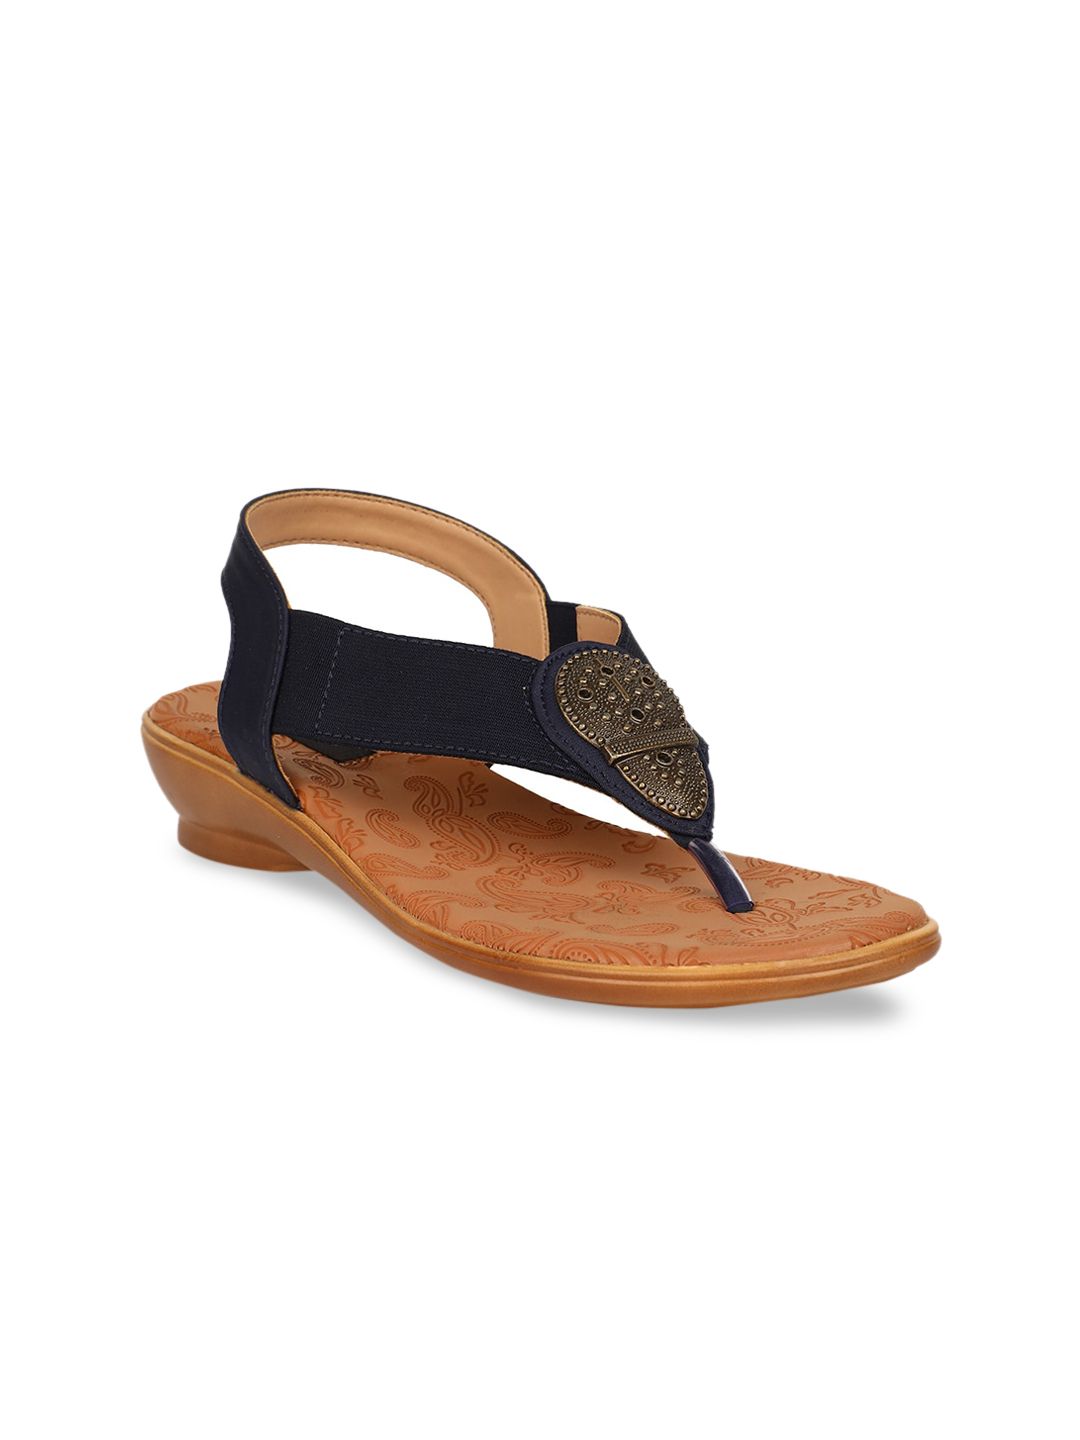 Bata Women Navy Blue Solid Wedges Price in India